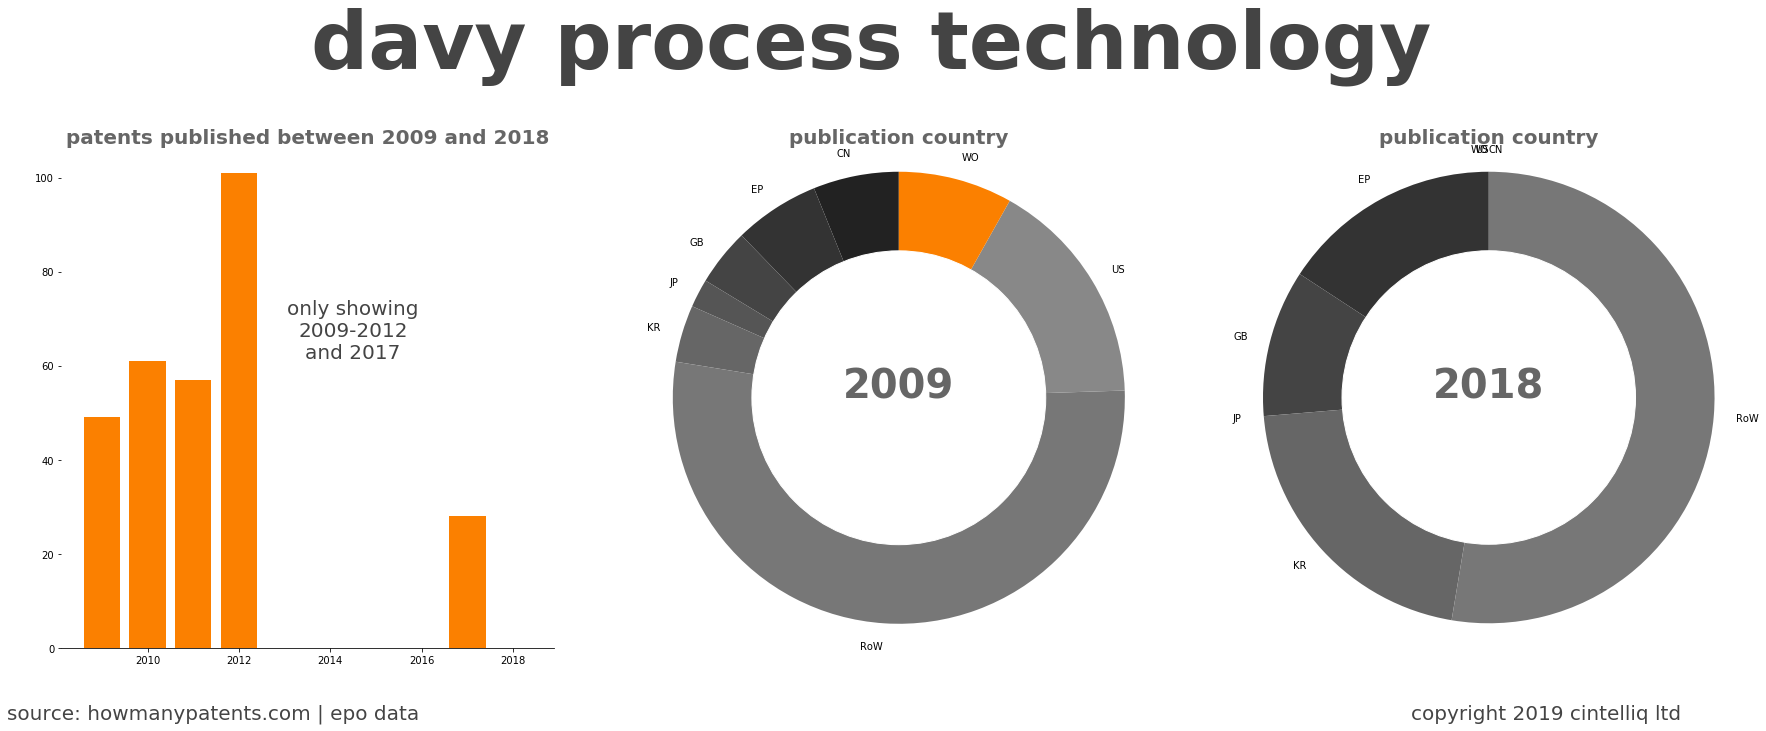 summary of patents for Davy Process Technology